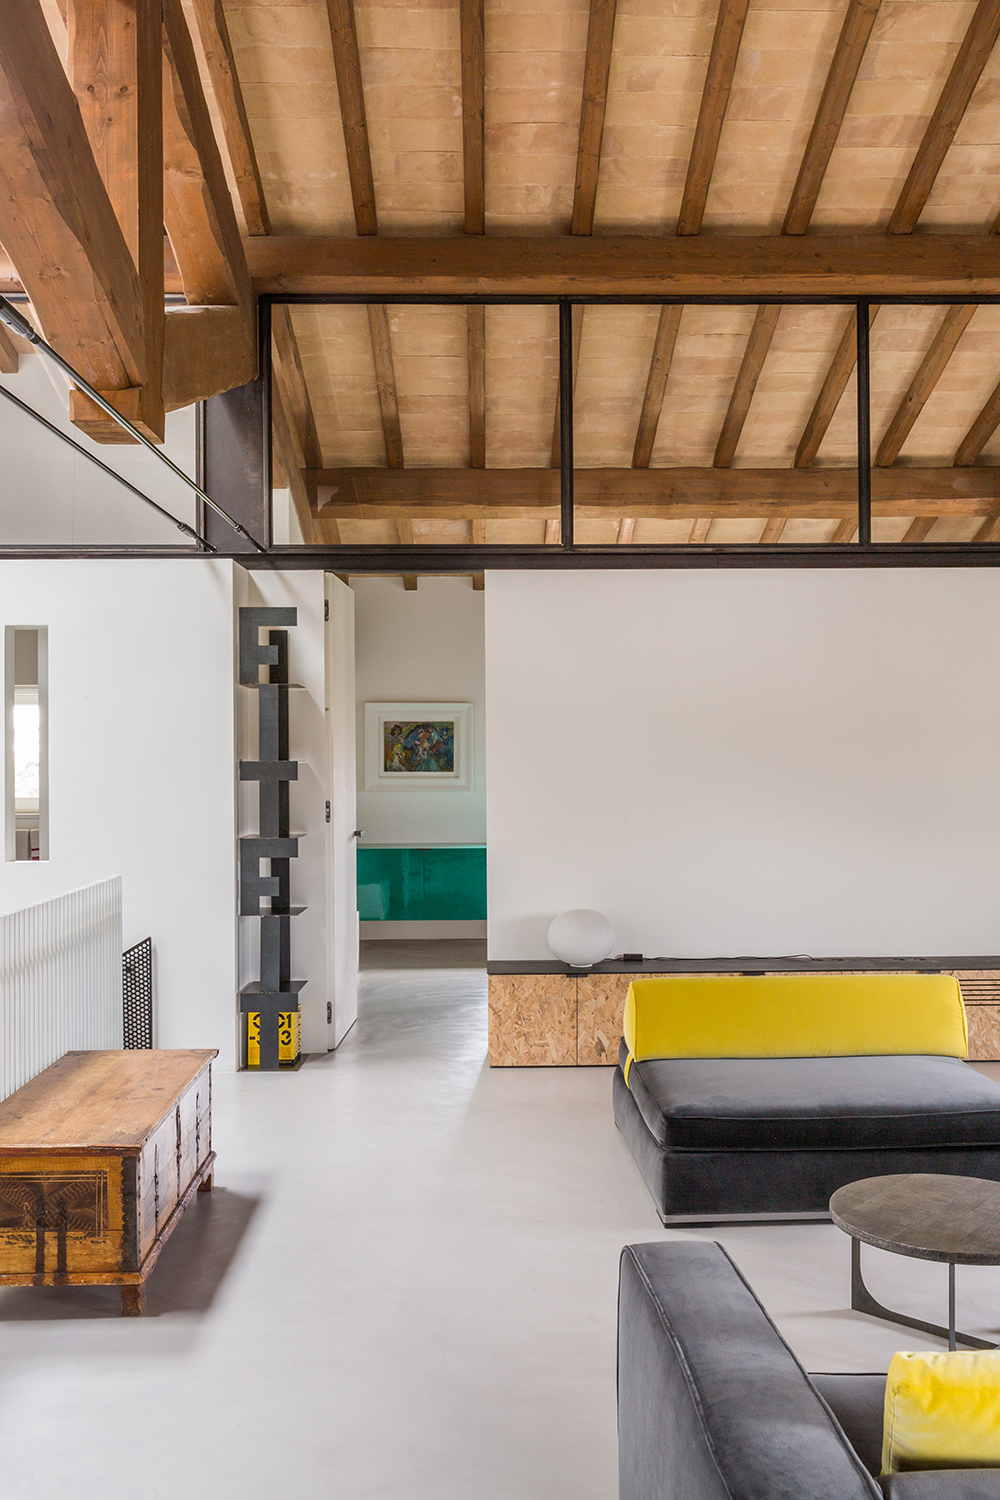 Archisearch In the countryside in Rome: Alvisi Kirimoto designs the domestic landscape of a farmhouse with a rock soul